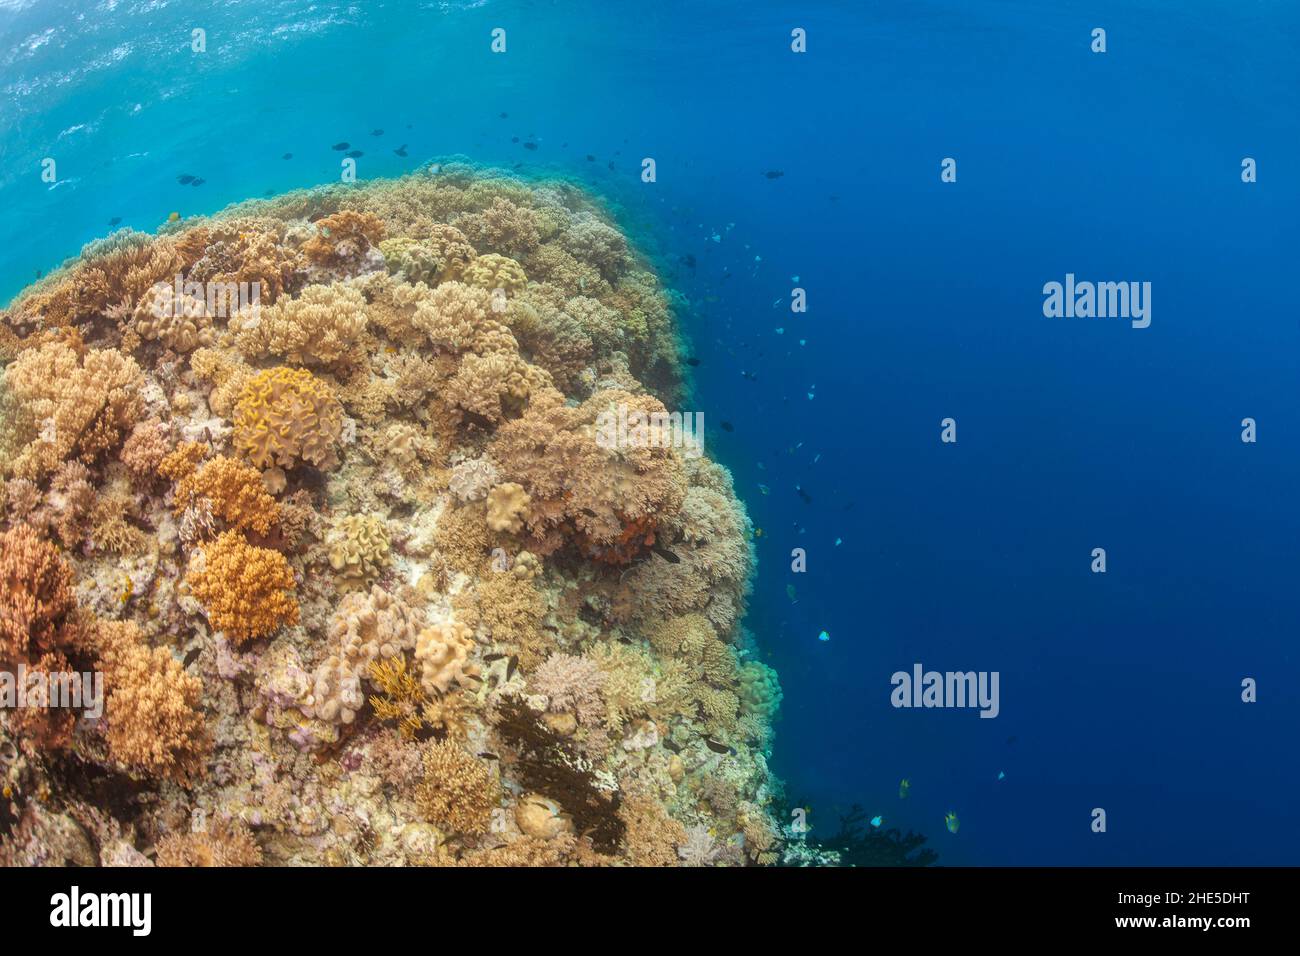 Both soft and hard coral line the top of the reef at the edge of a wall Indonesia, Pacific Ocean. Stock Photo